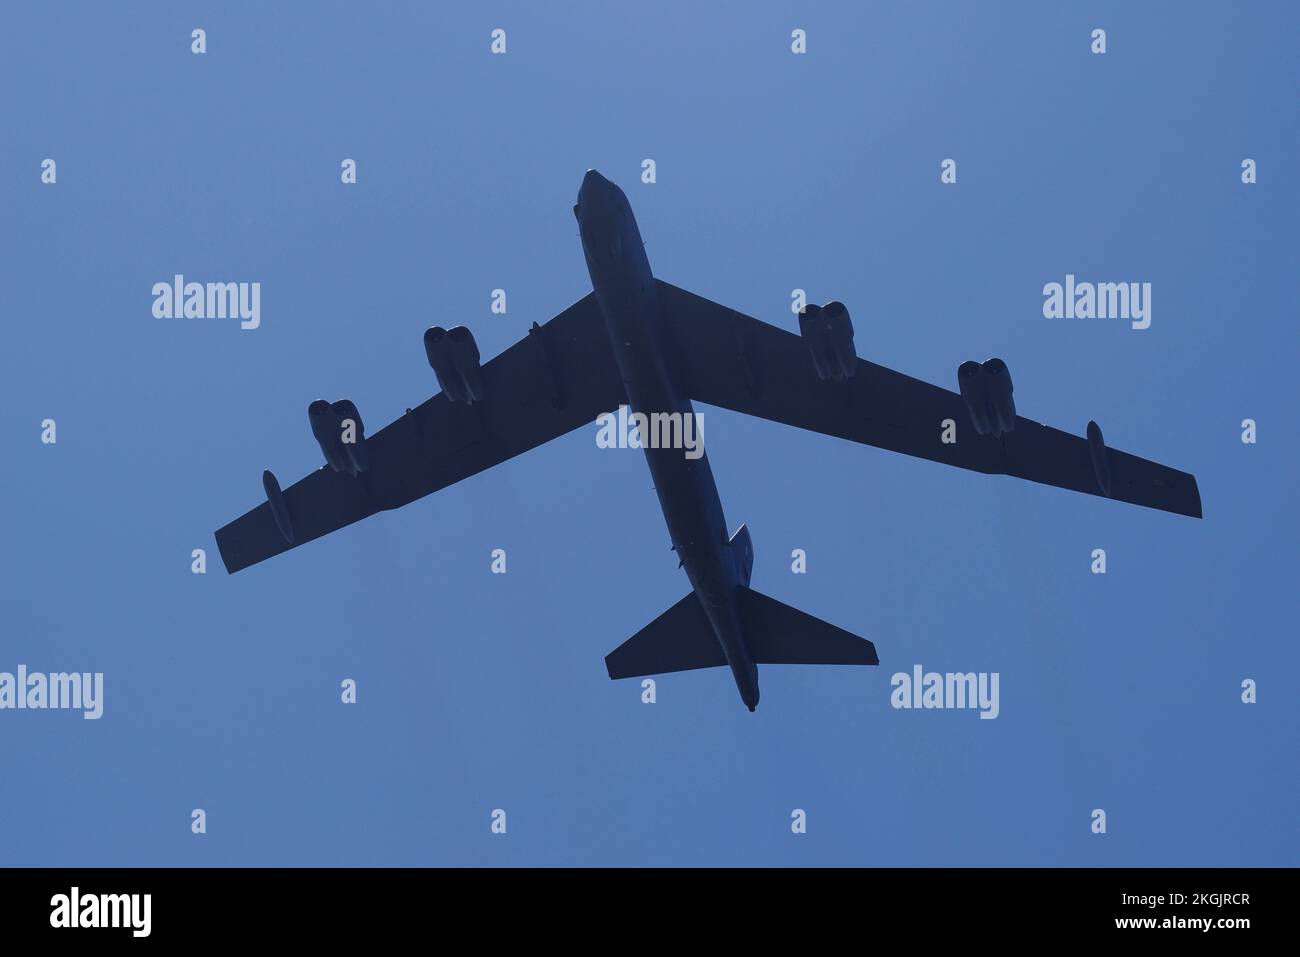 Boeing B-52H Flypast, RAF Valley, Anglesey, pays de Galles du Nord, Royaume-Uni. Banque D'Images